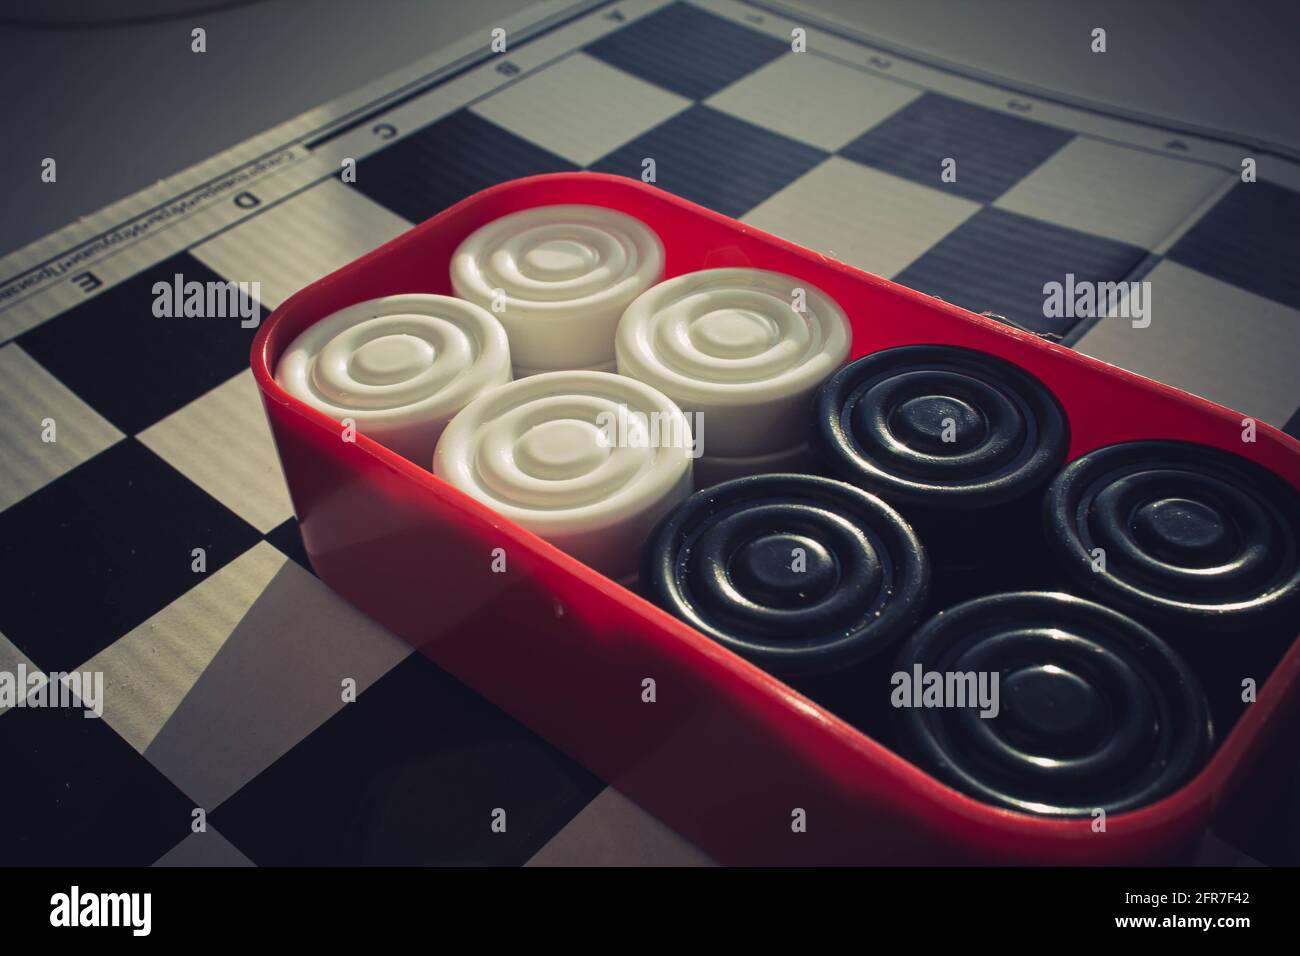 Board game of checkers. Black and white chips for the game. Chess field. Checkers move close-up. Checker in hand. Stock Photo